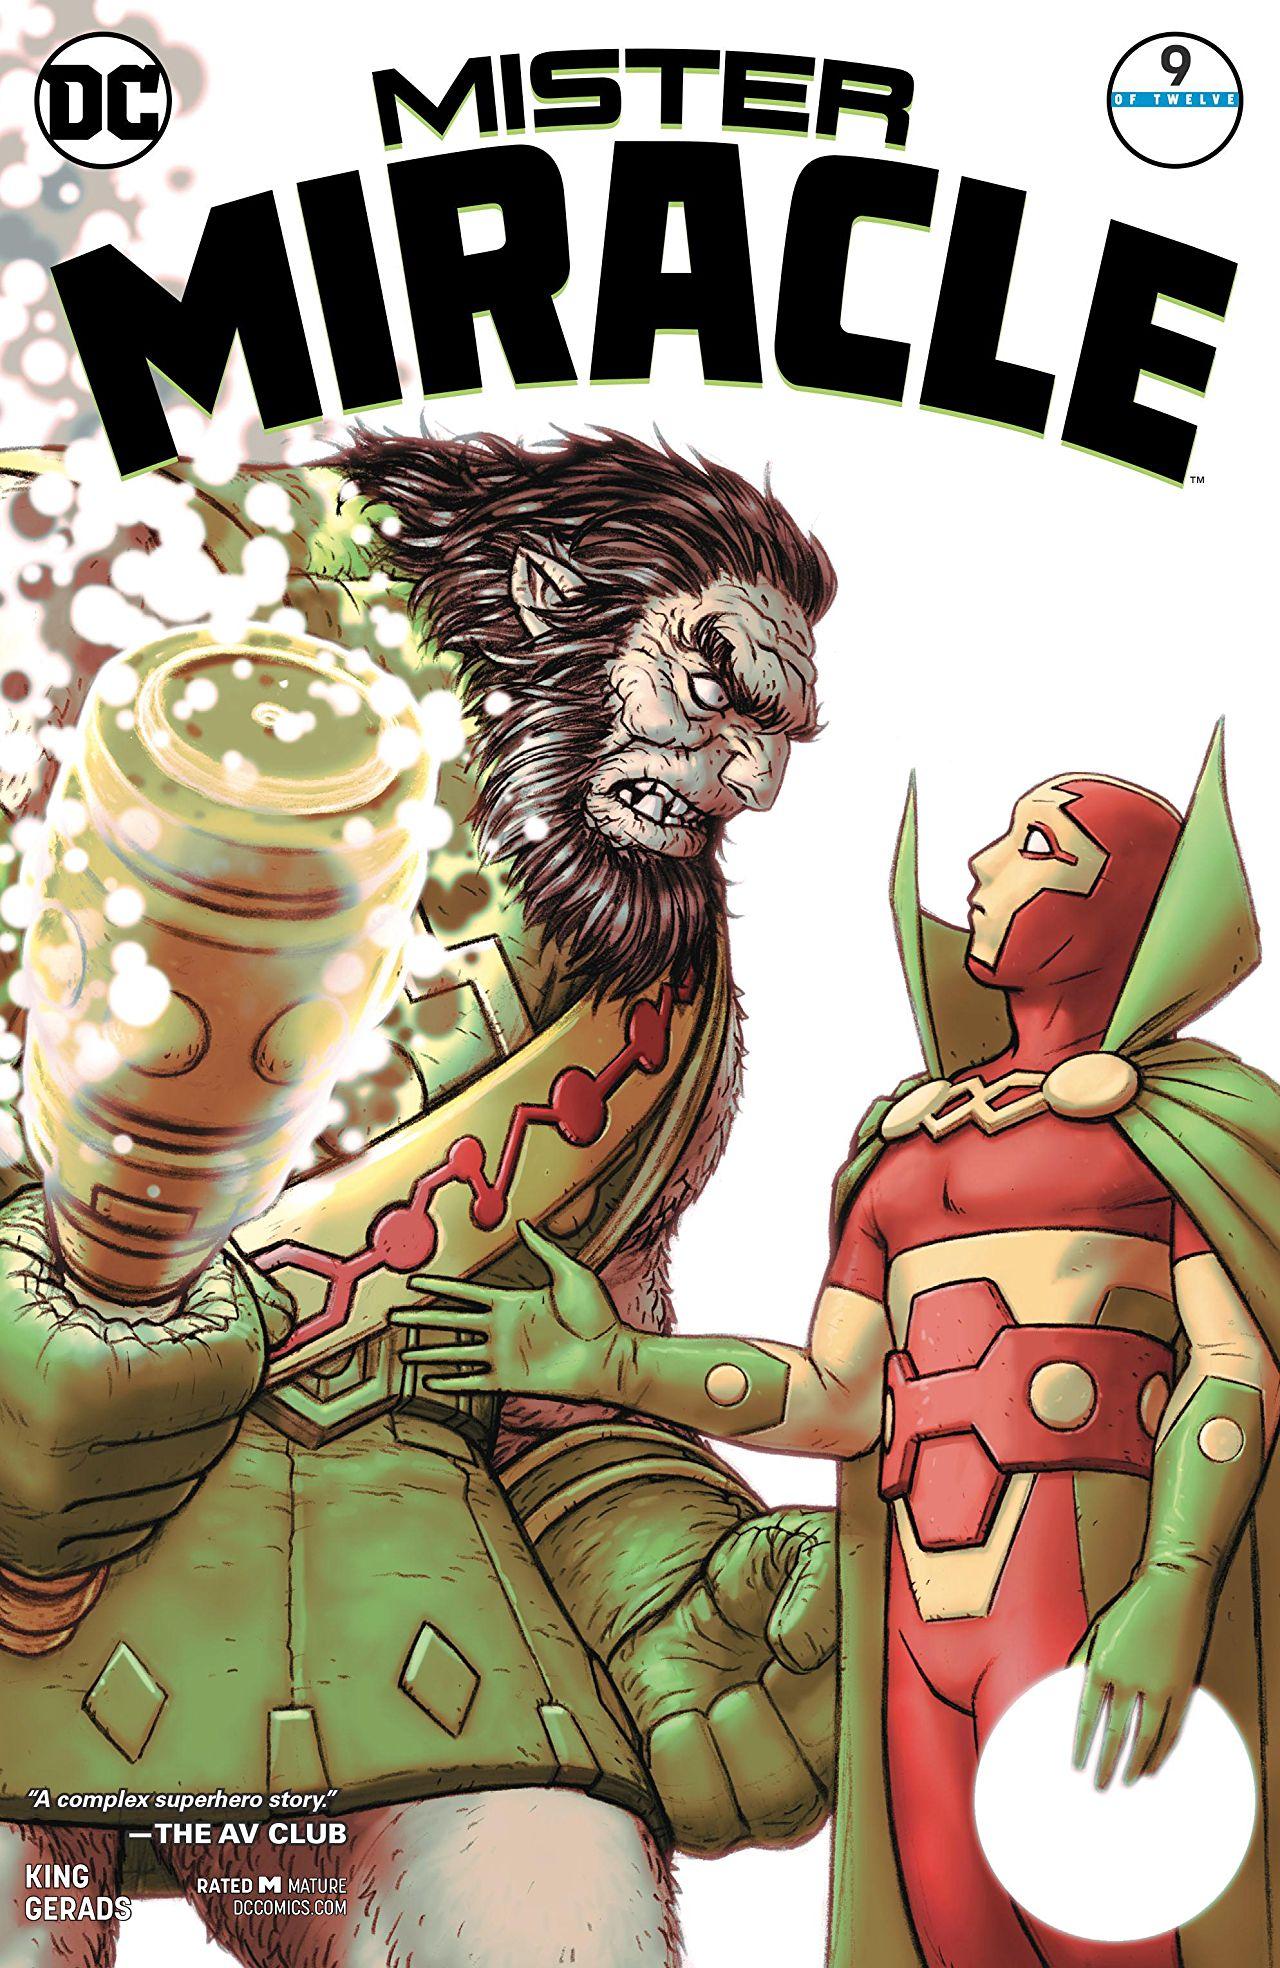 Mister Miracle Vol. 4 #9